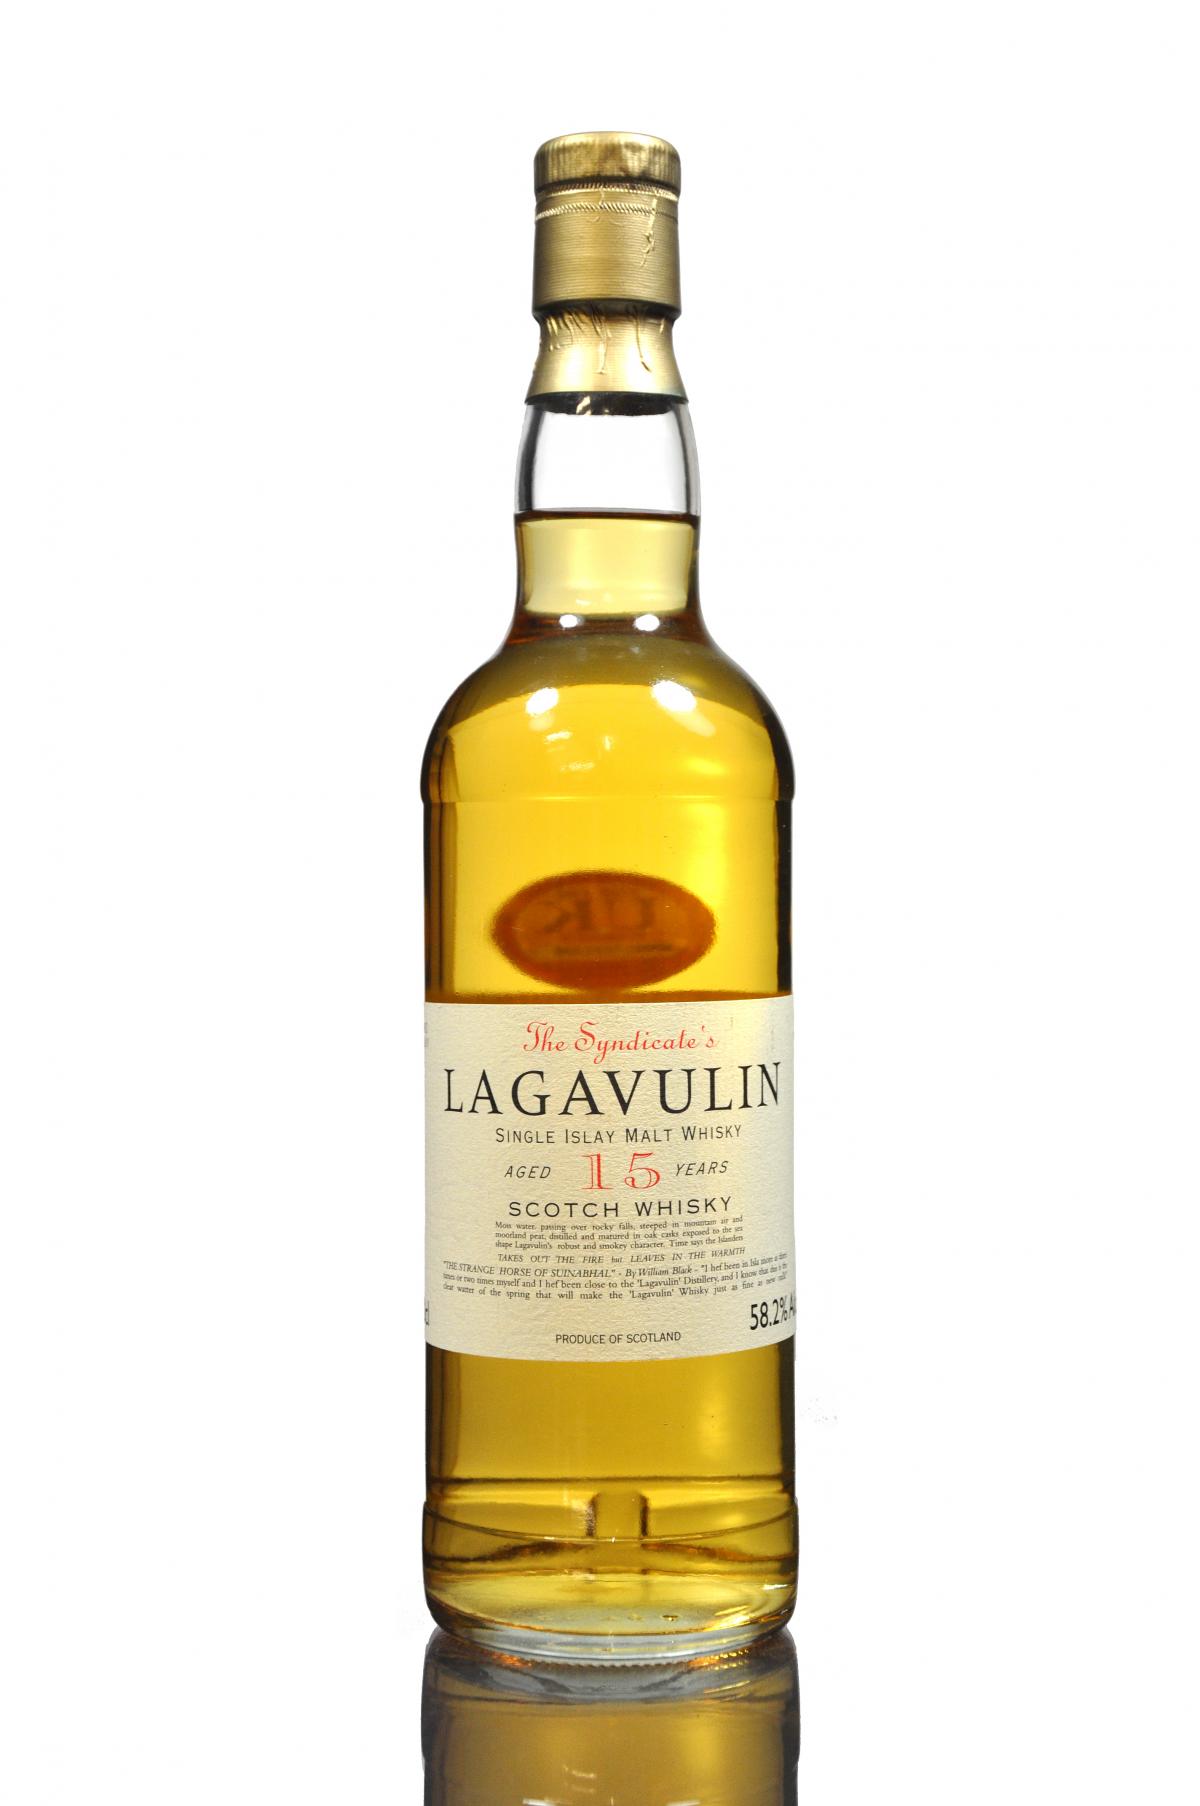 Lagavulin 15 Year Old - The Syndicate